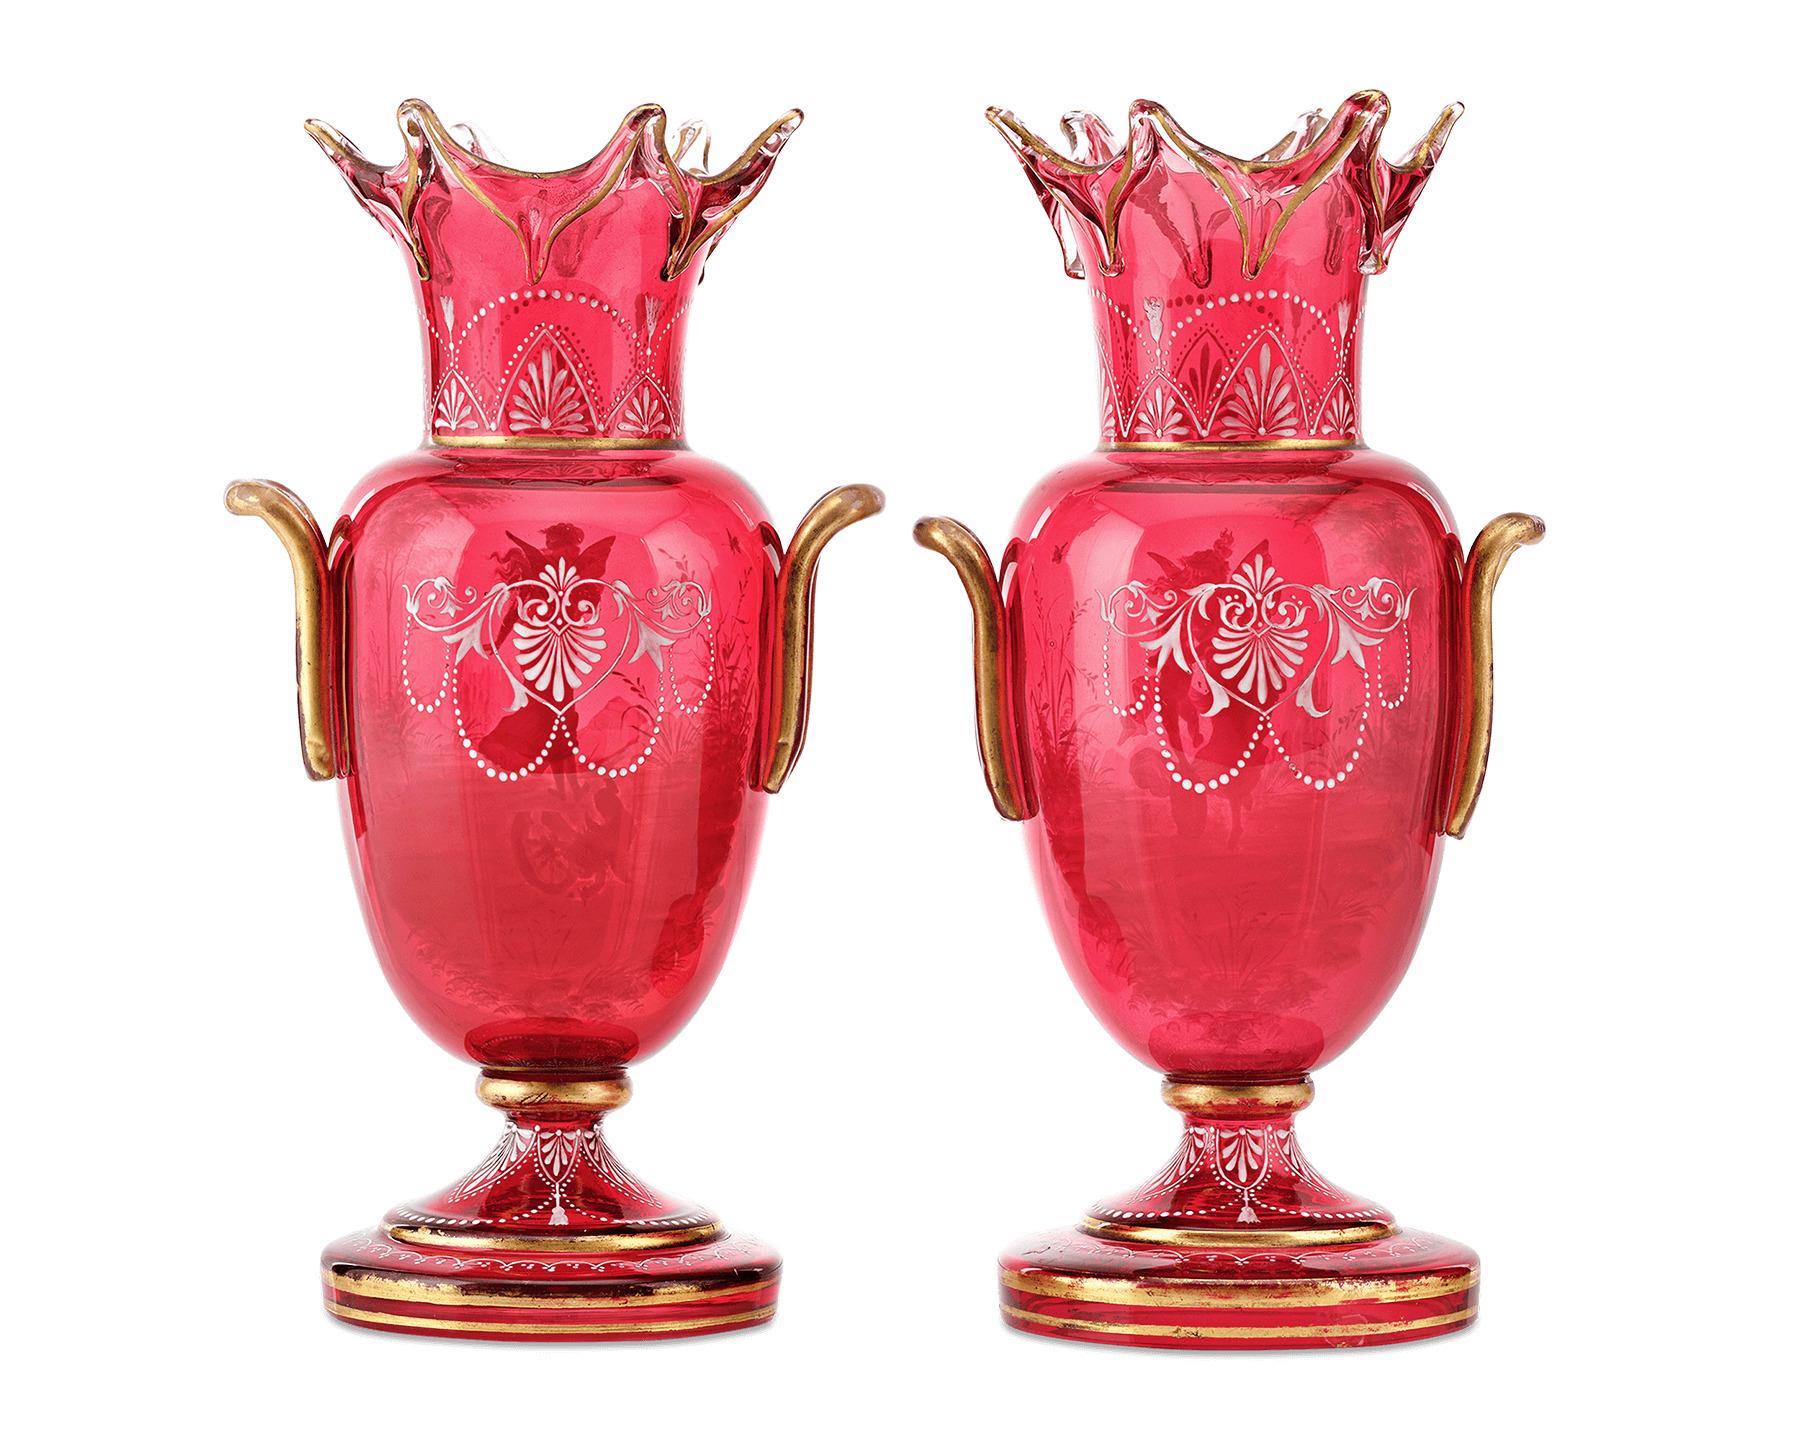 This beautiful and important pair of cranberry glass vases feature the timeless childhood silhouettes known as Mary Gregory. The motifs are executed in white enameling of varying thickness to give the images amazing depth. This elegant pair is a